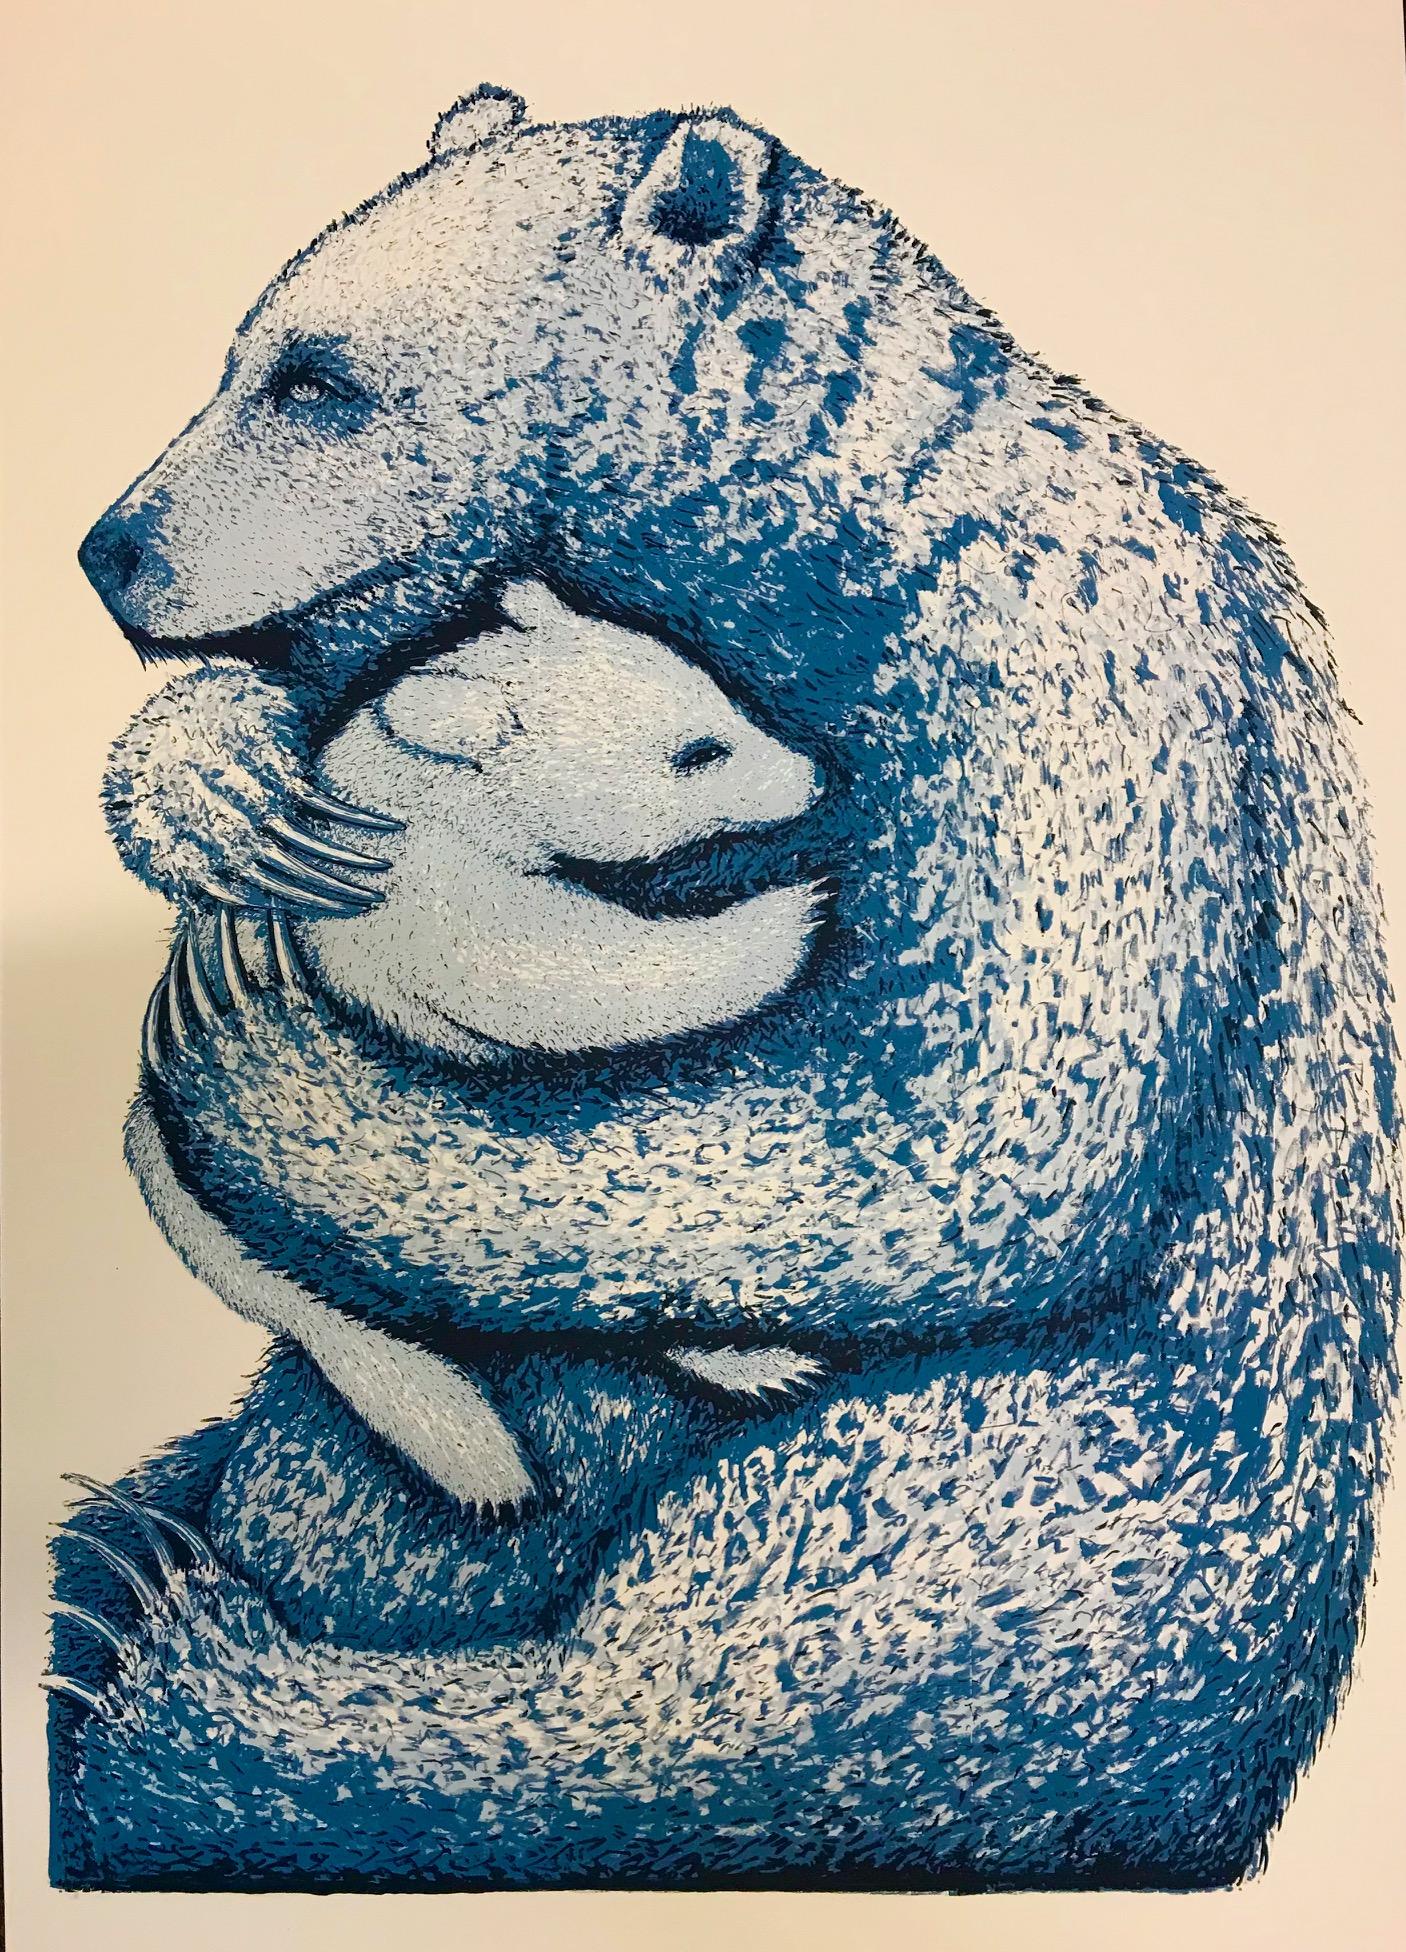 Bear Hugs
Tim Southall
Silkscreen Print
Size : H 70 cm x W 50 cm
Please note that in situ images are purely an indication of how a piece may look.

‘Bear Hugs’ is a large silkscreen print in a variable edition by renowned printmaker Tim Southall.